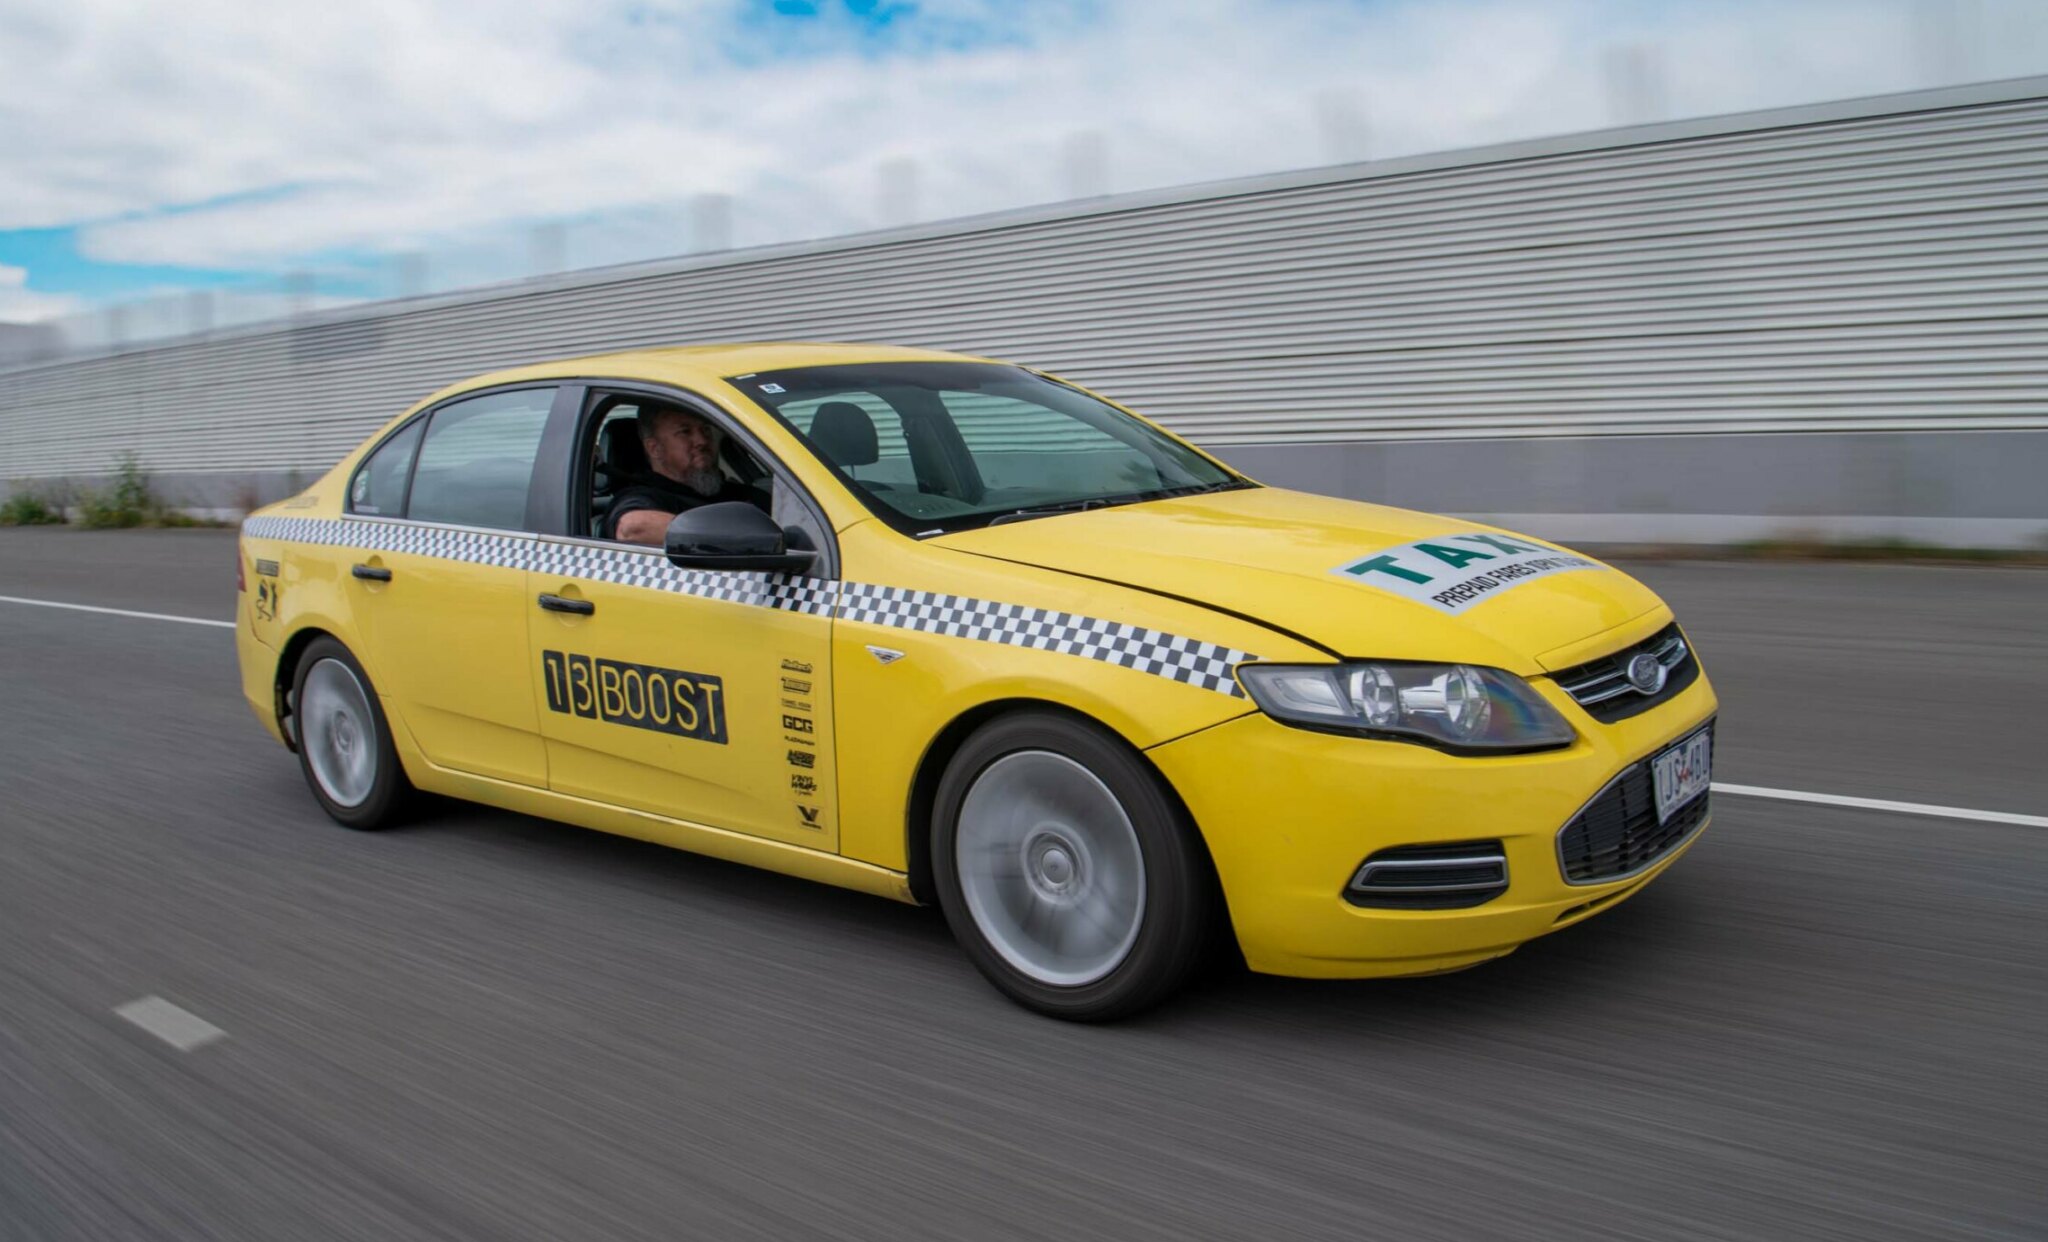 Video: Turbo Taxi is back!